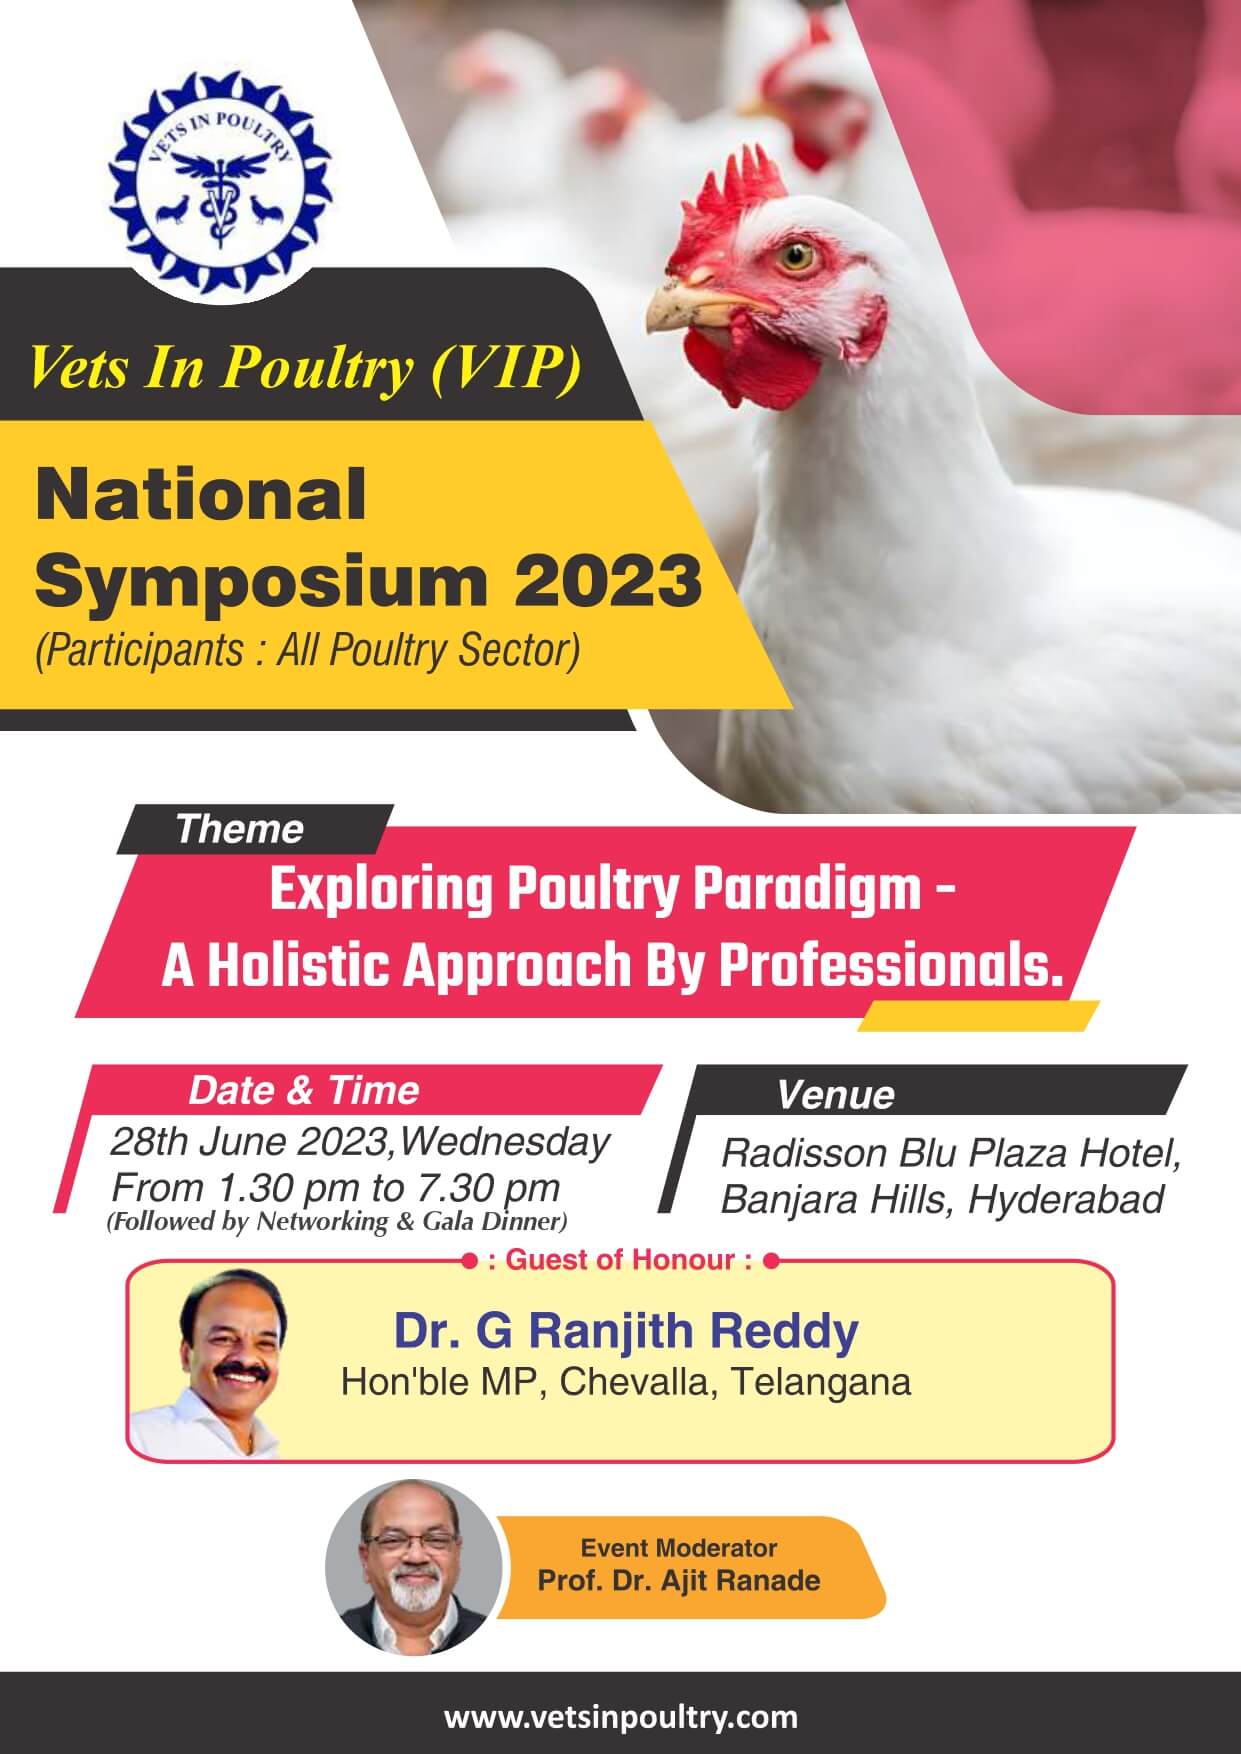 Vets In Poultry National Symposium 2023